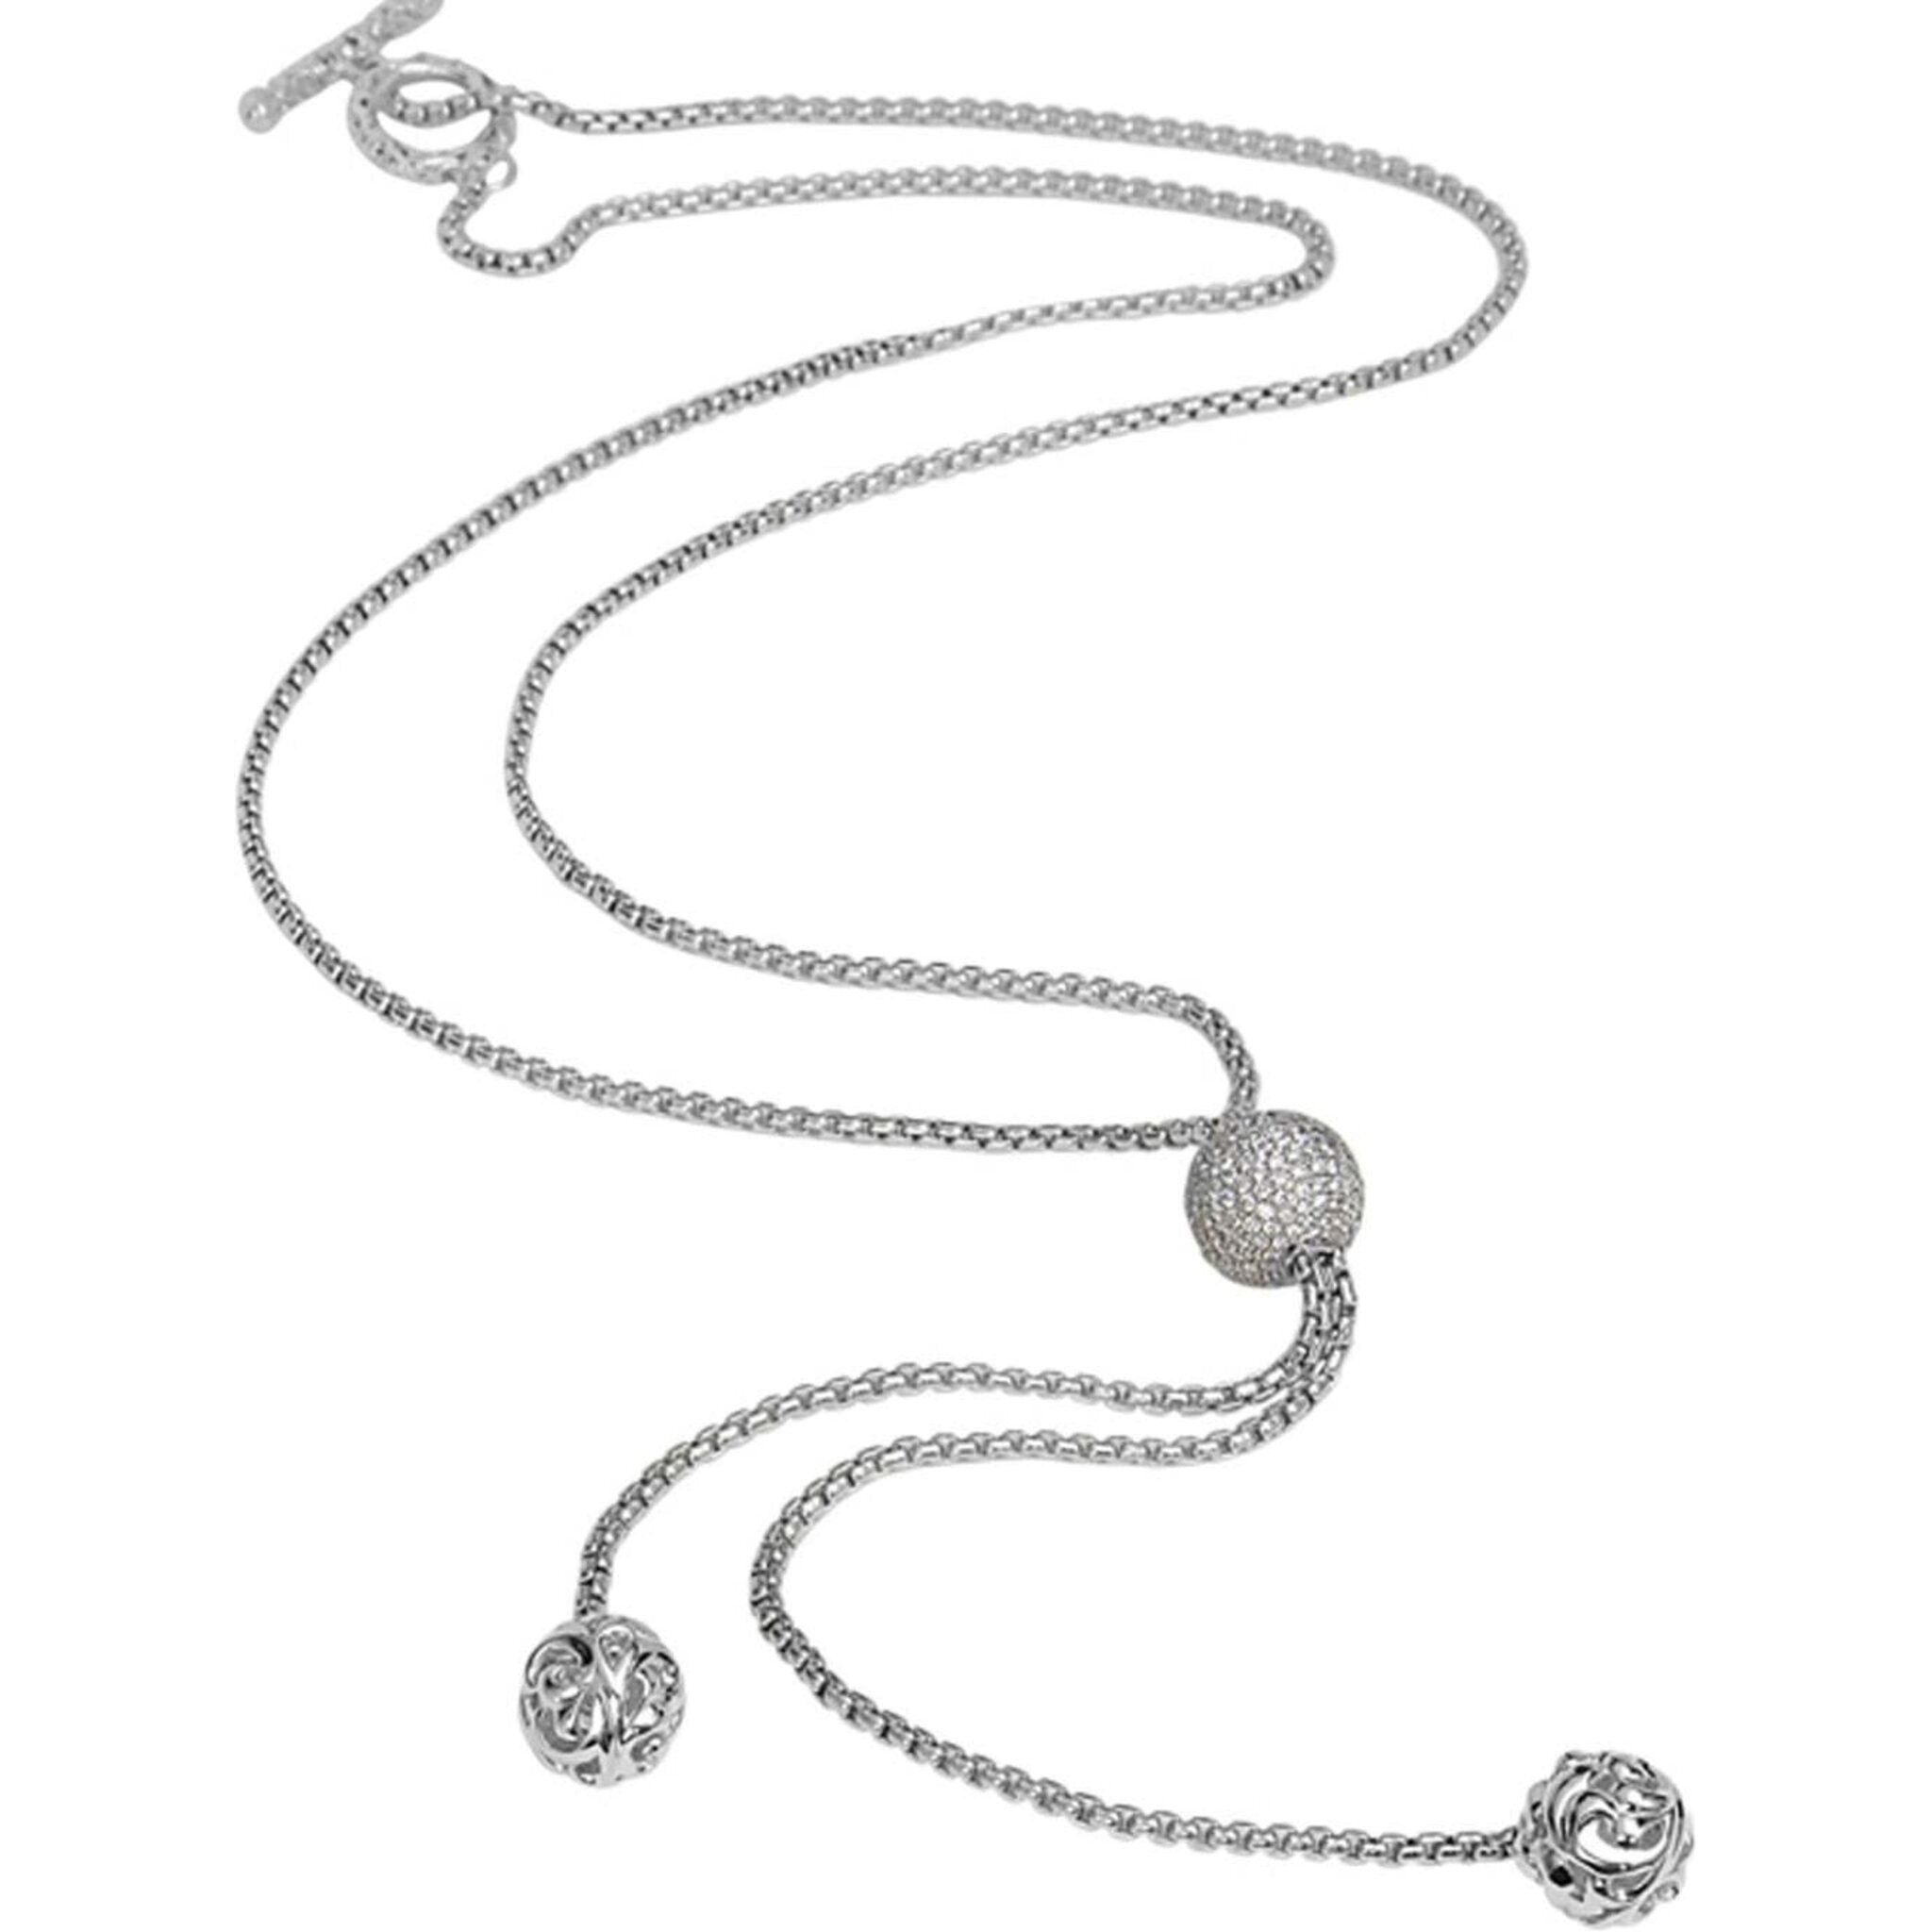 Charles Krypell - Gold Ivy Diamond Bead Necklace - White Gold and Diamond